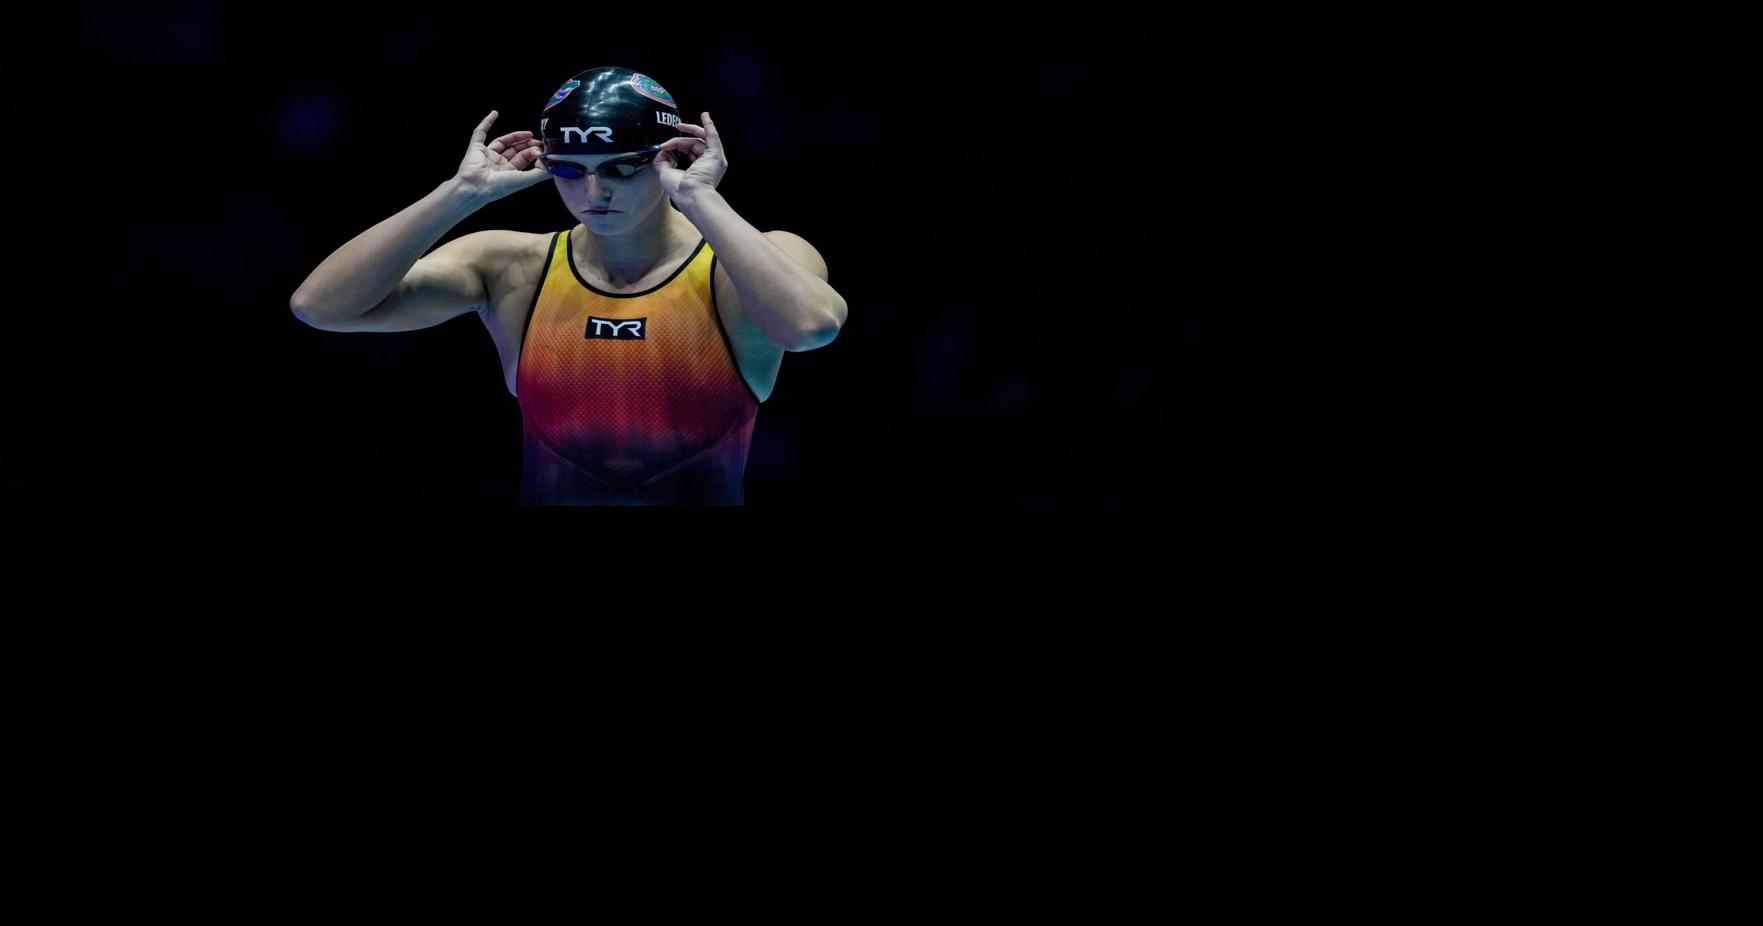 Katie Ledecky just keeps chugging along, still excited about swimming after all these years